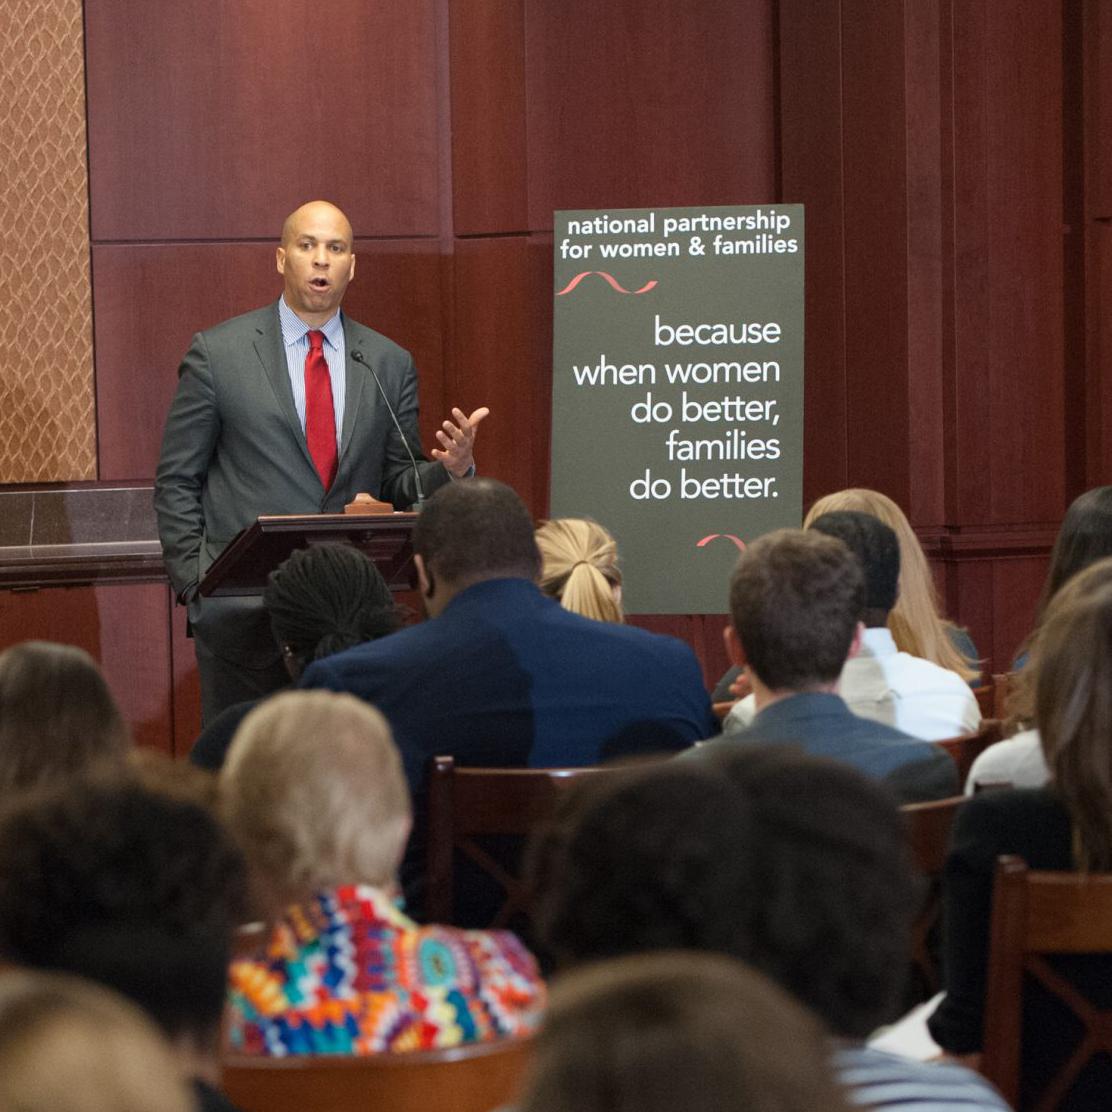 Senator Cory Booker National Partnership for Women and Families Congressional briefing